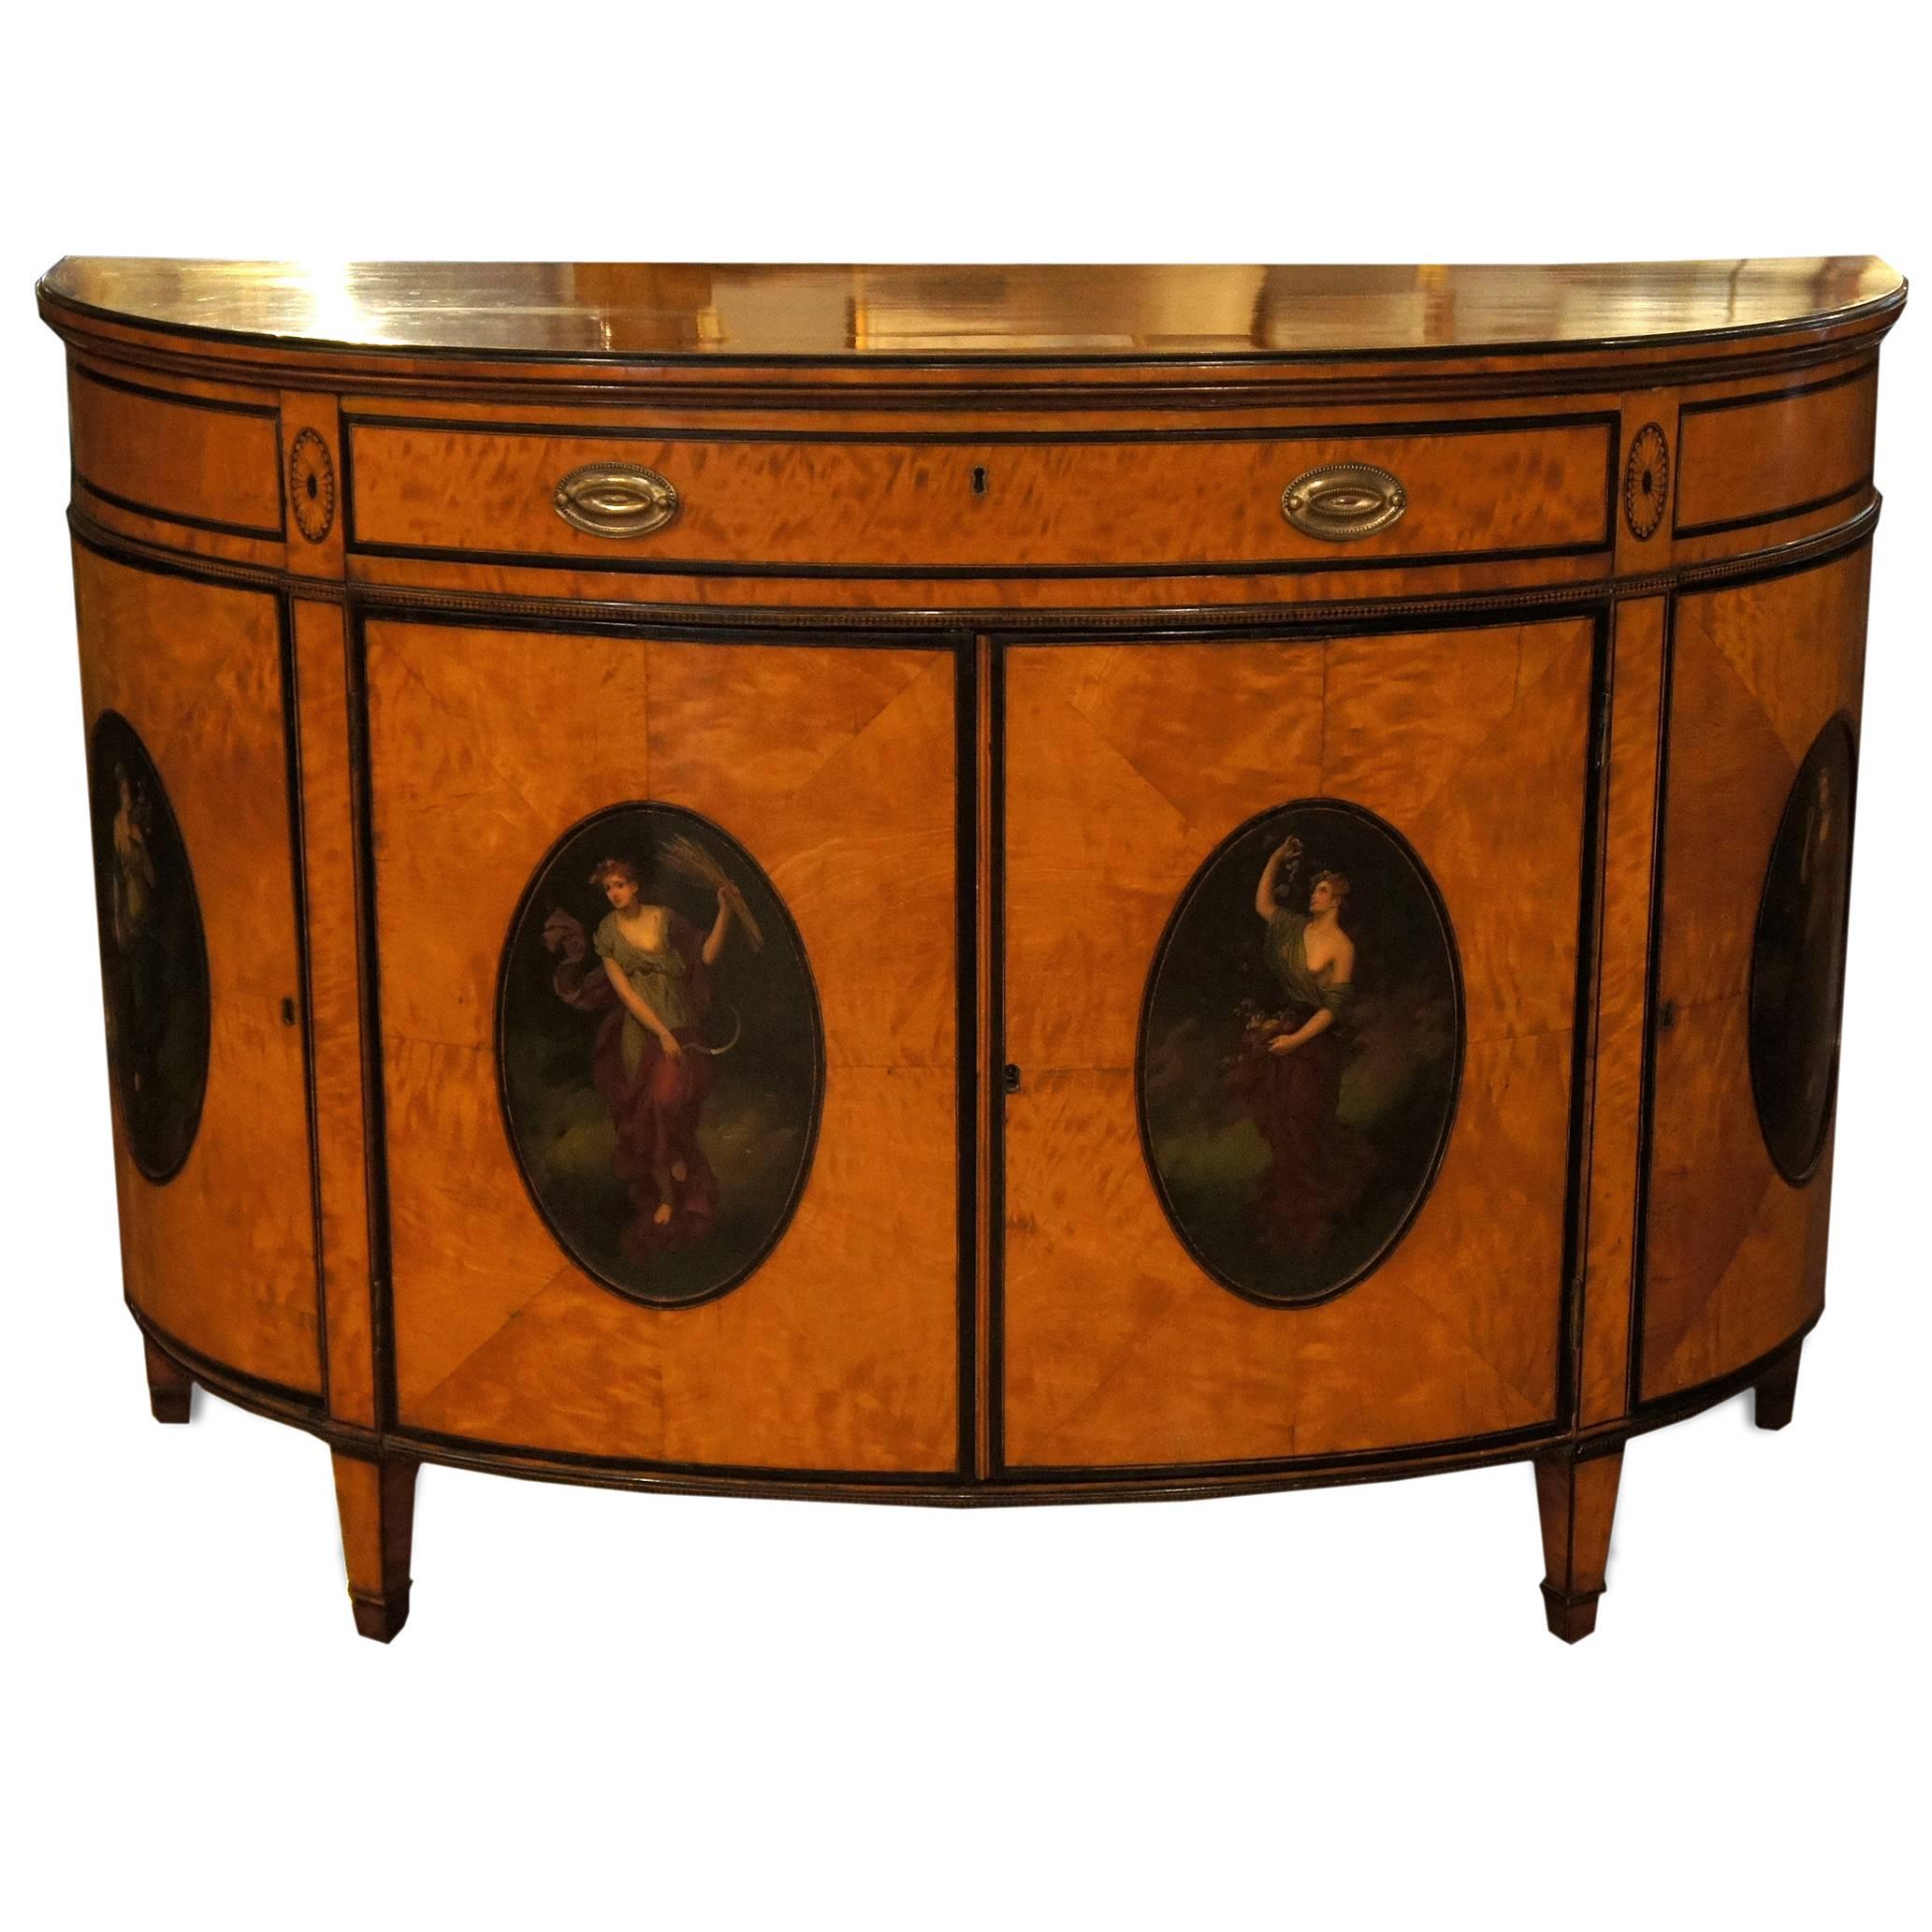 Satinwood Adam Style Demilune Commode/Chest of Drawers